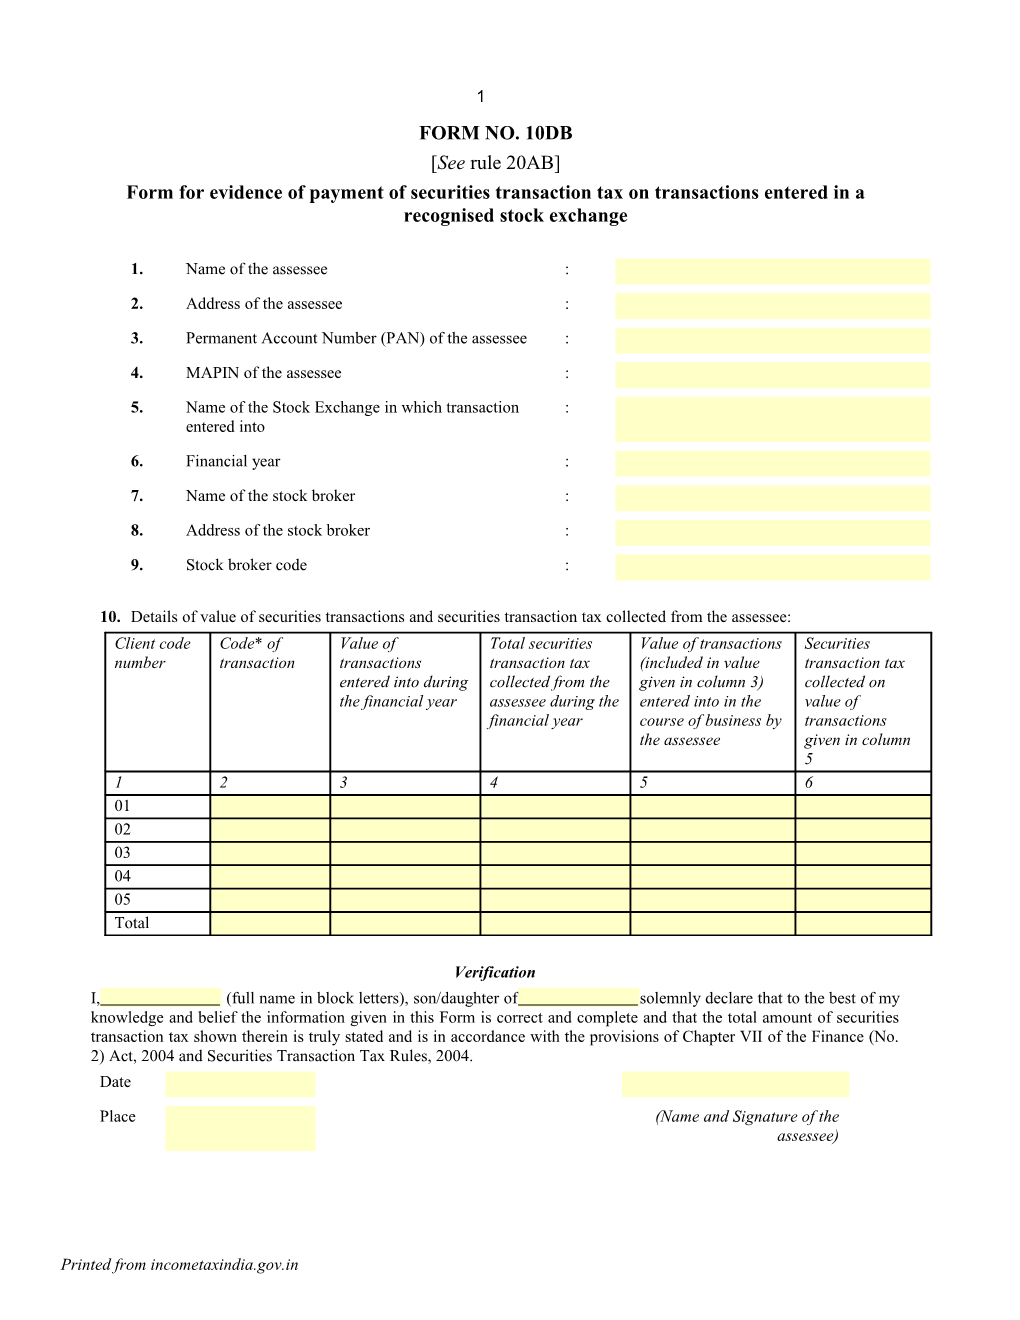 Form for Evidence of Payment of Securities Transaction Tax on Transactions Entered In